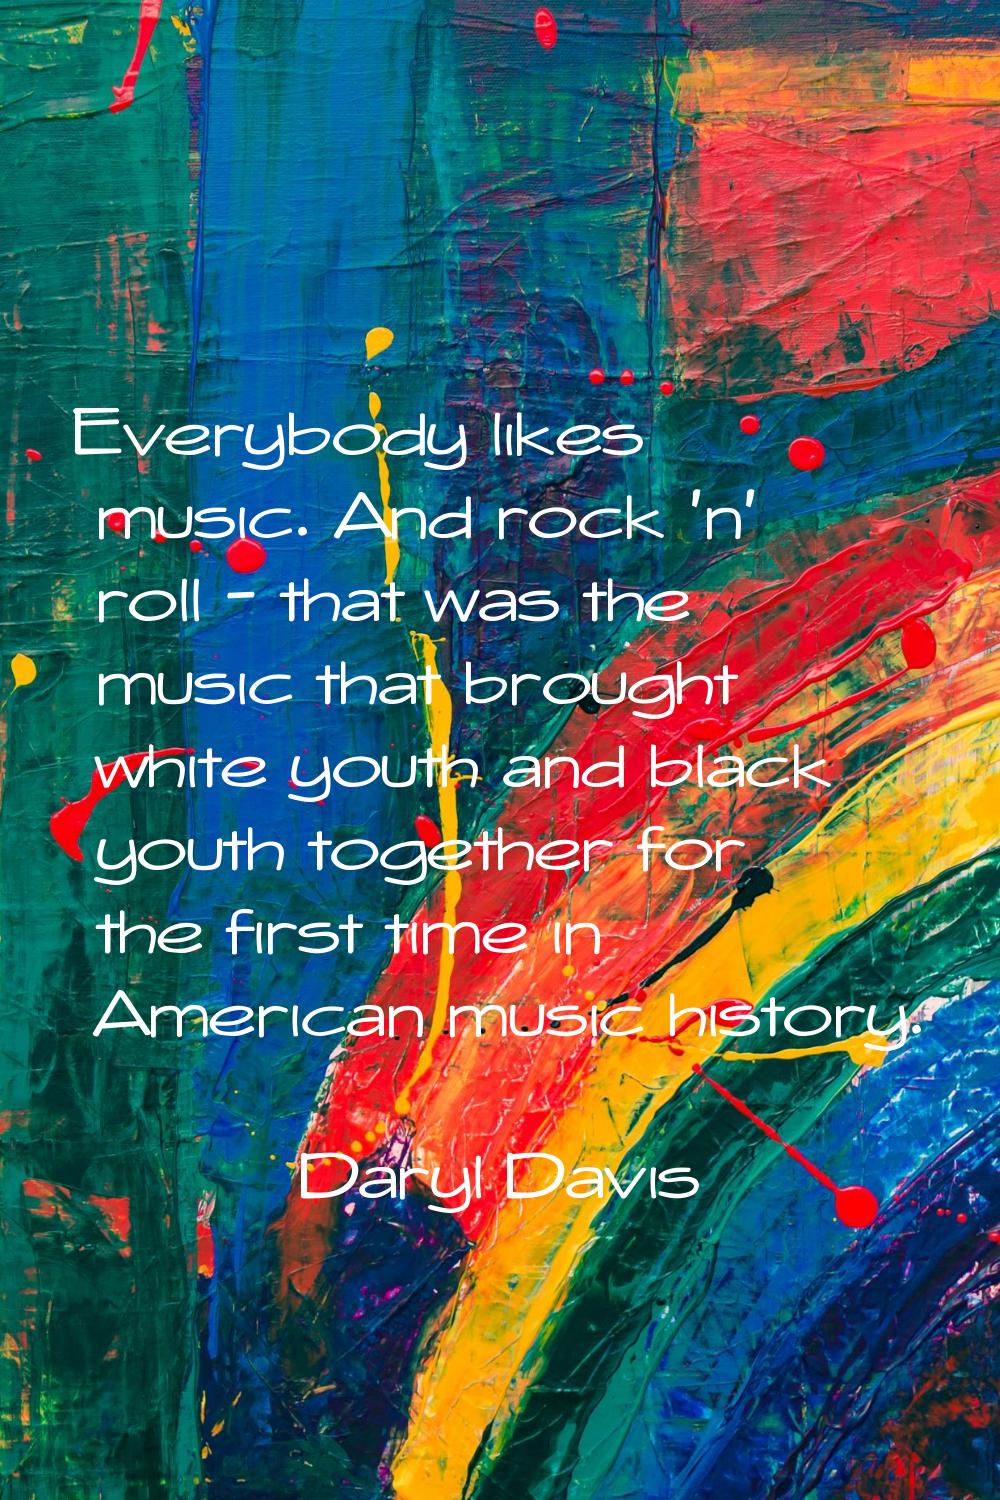 Everybody likes music. And rock 'n' roll - that was the music that brought white youth and black yo